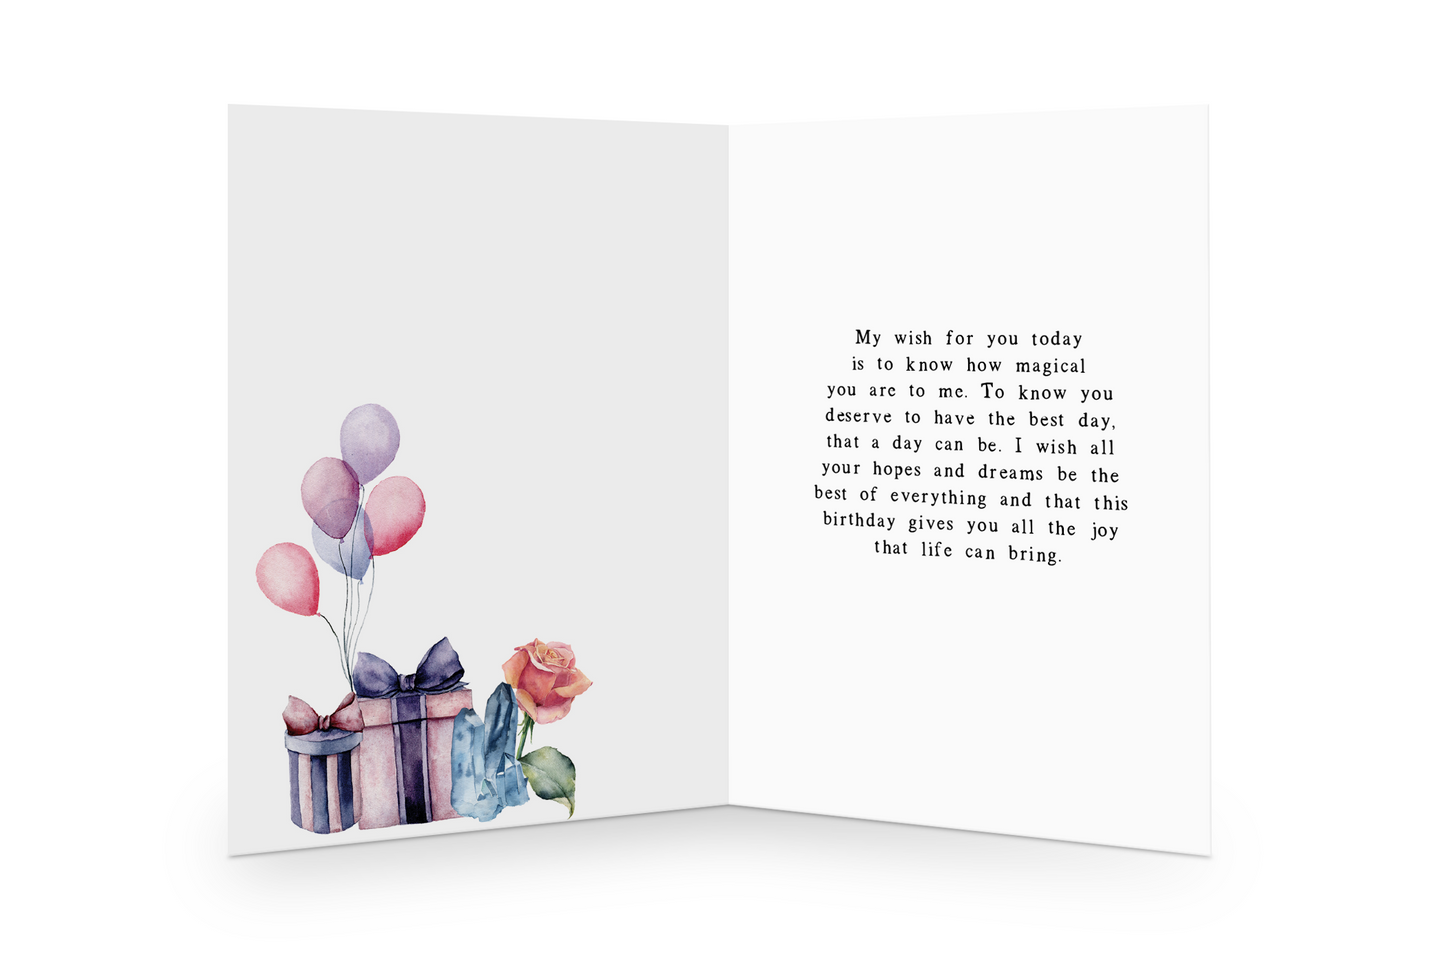 Birthday Poem inside greeting card by Courtney Peppernell